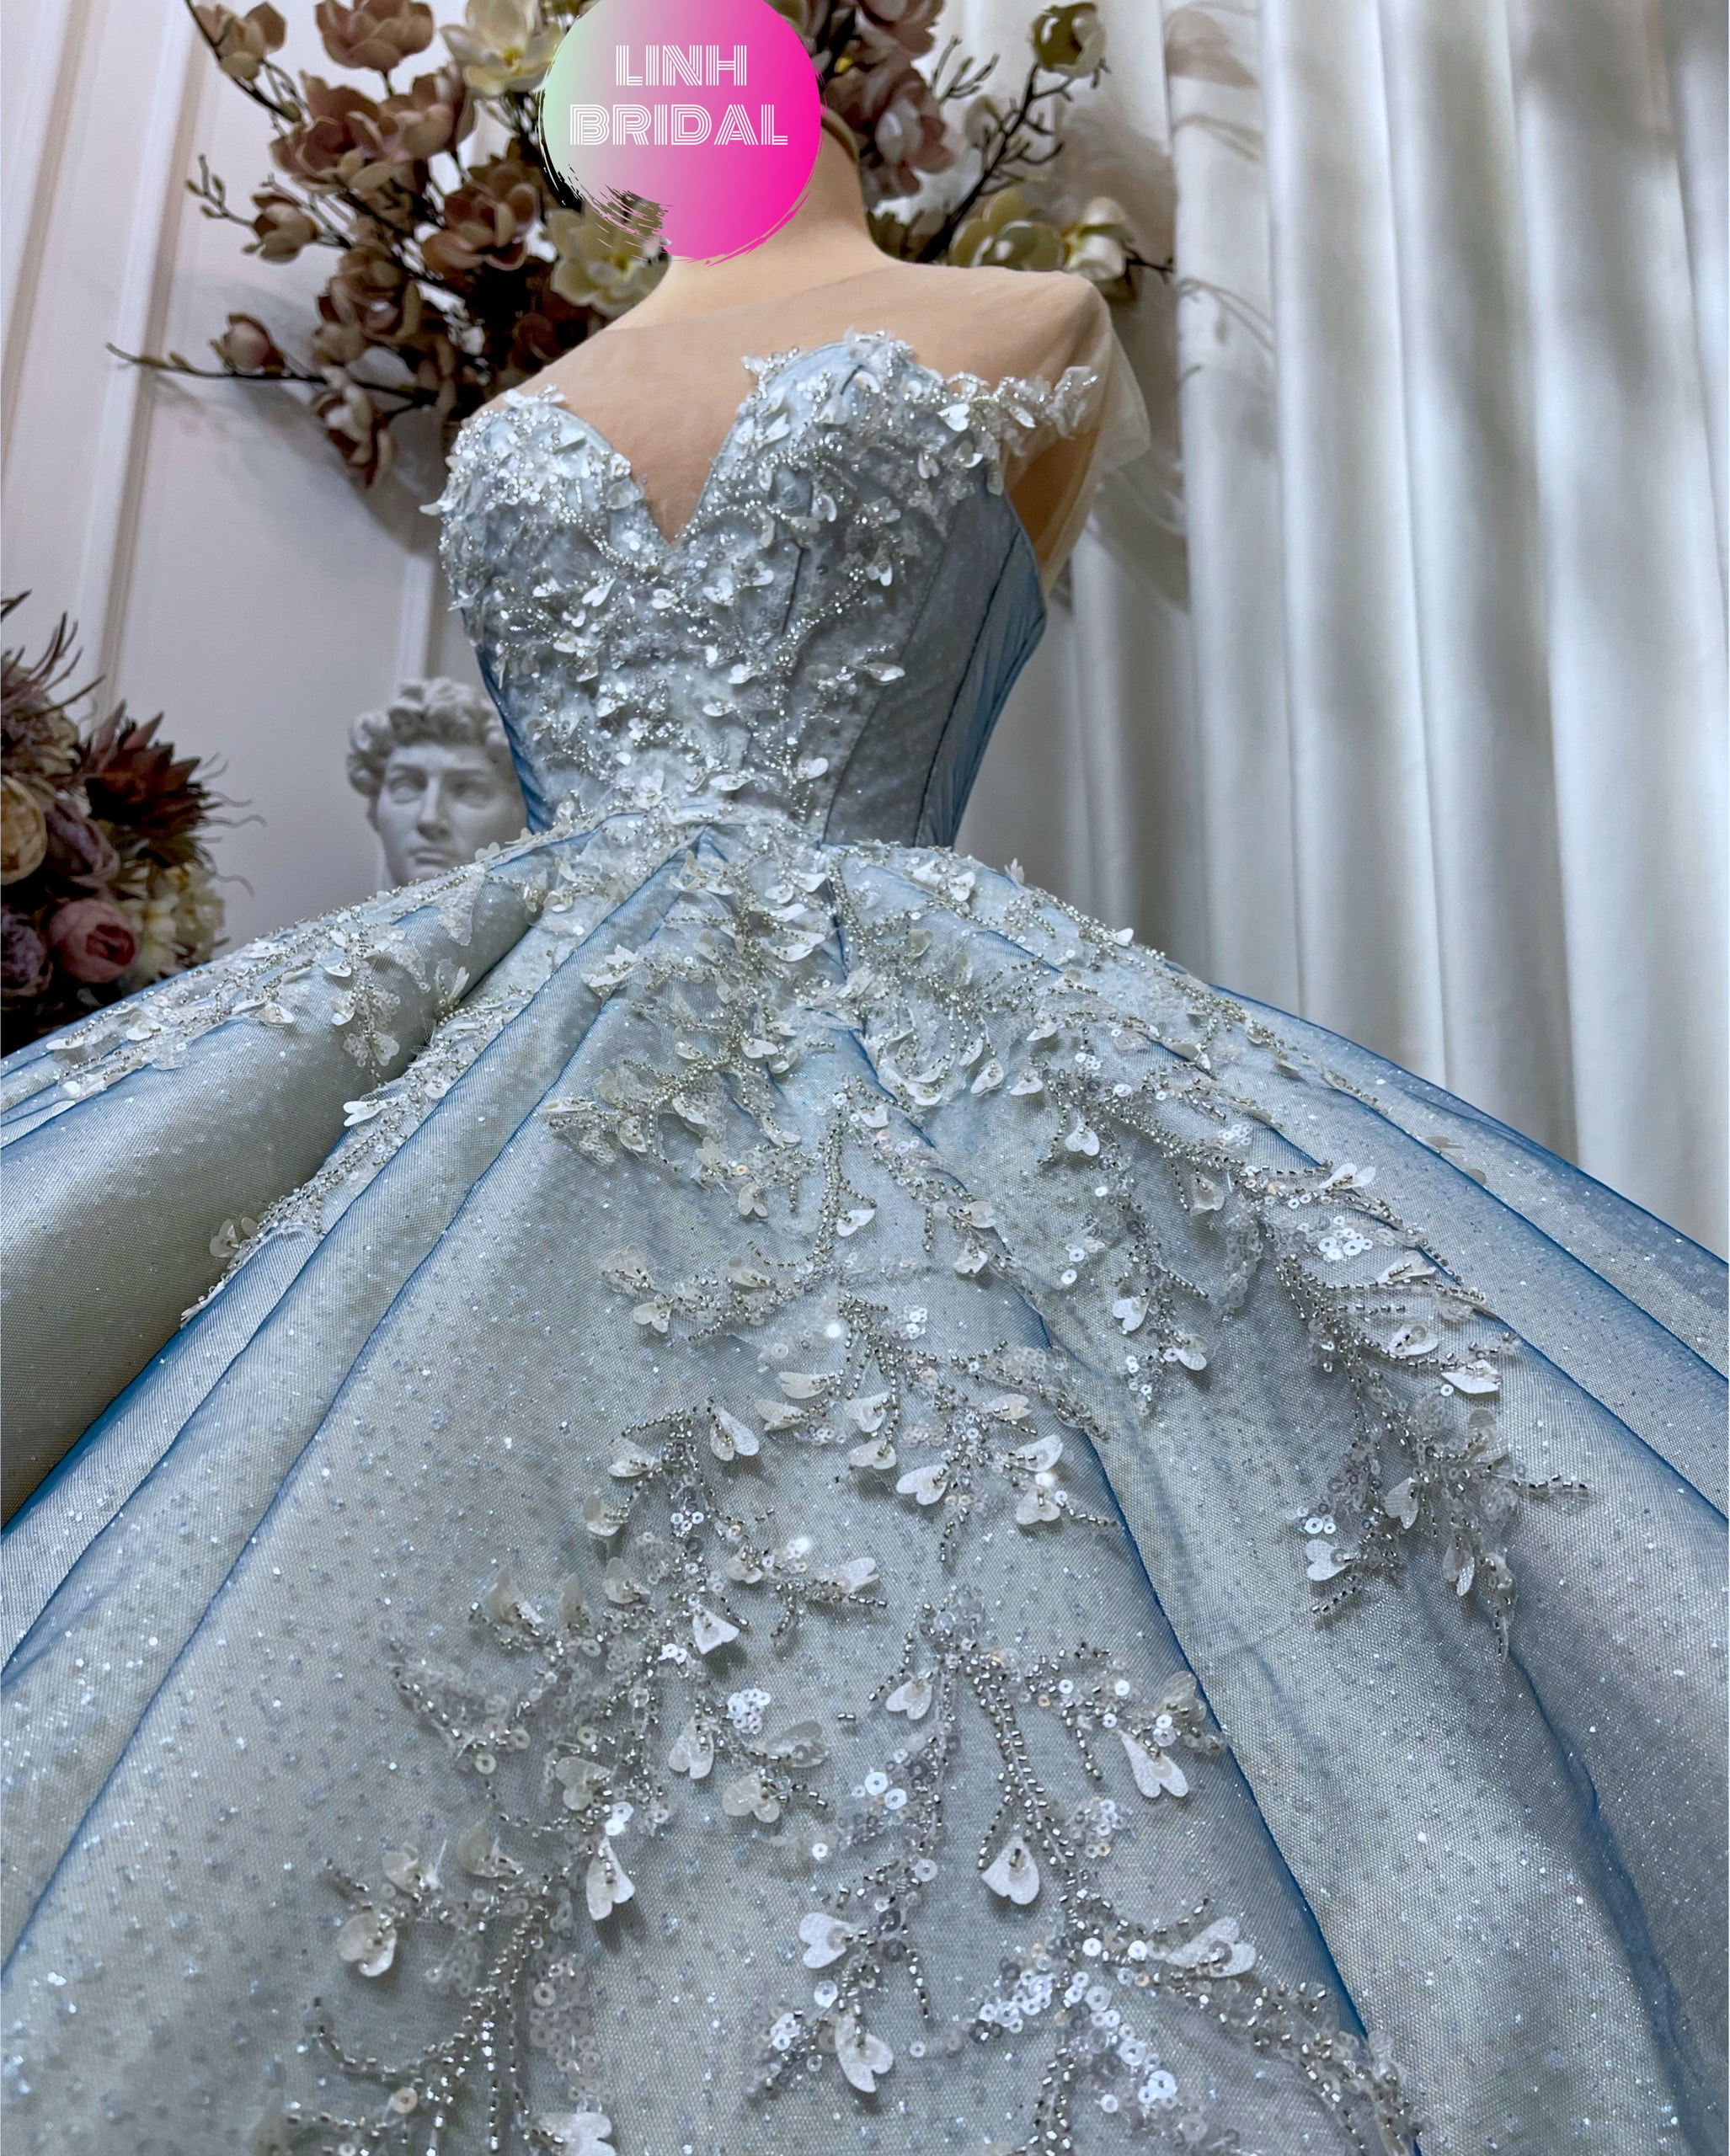 20 Fairytale Princess Ballgown Wedding Dresses from Etsy | SouthBound Bride